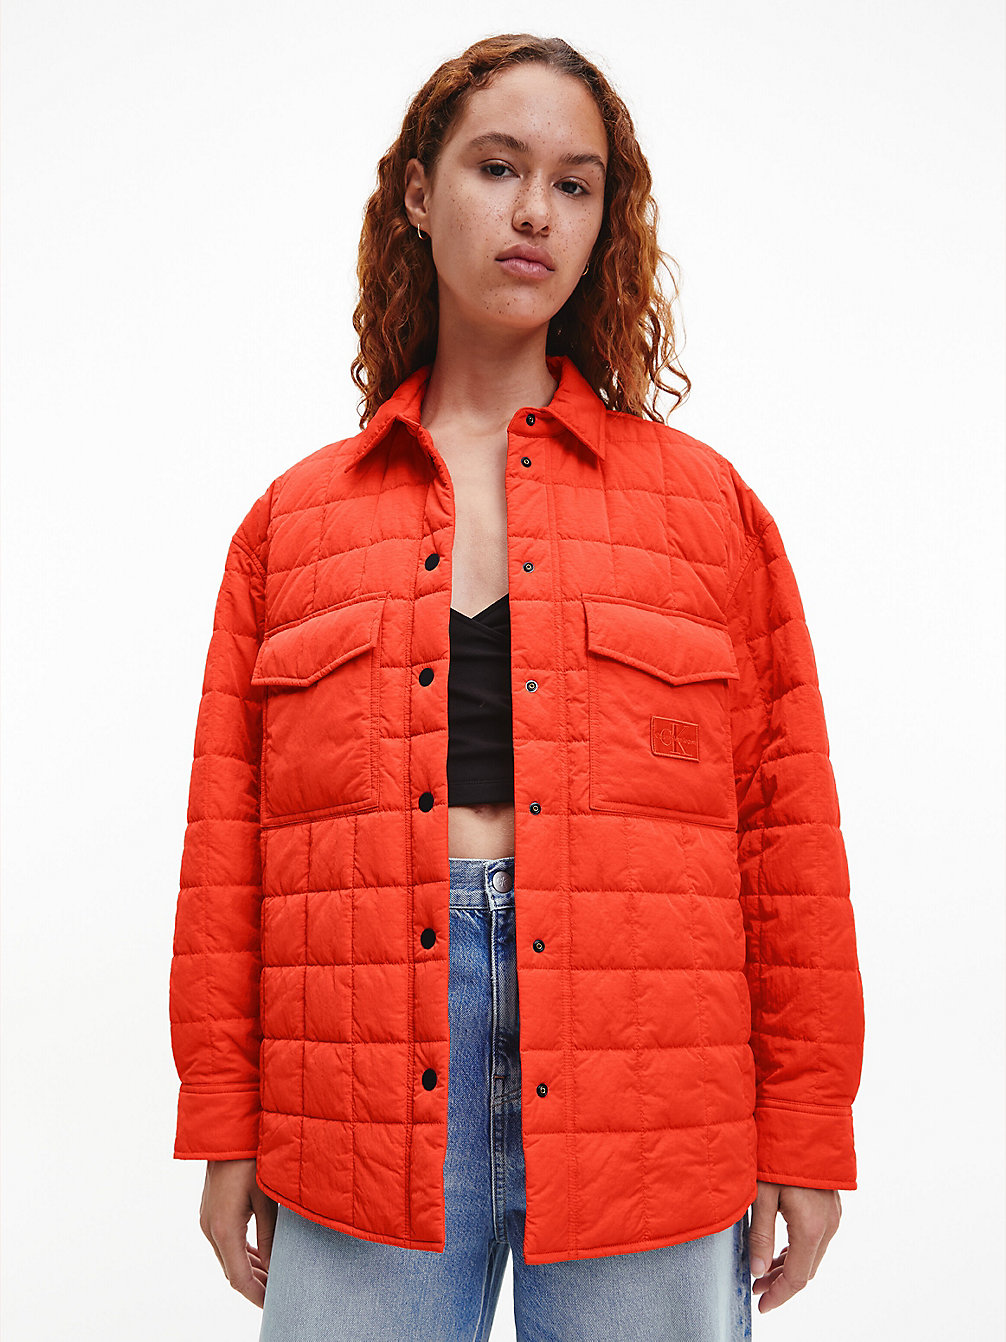 CORAL ORANGE Recycled Nylon Quilted Shirt Jacket undefined women Calvin Klein